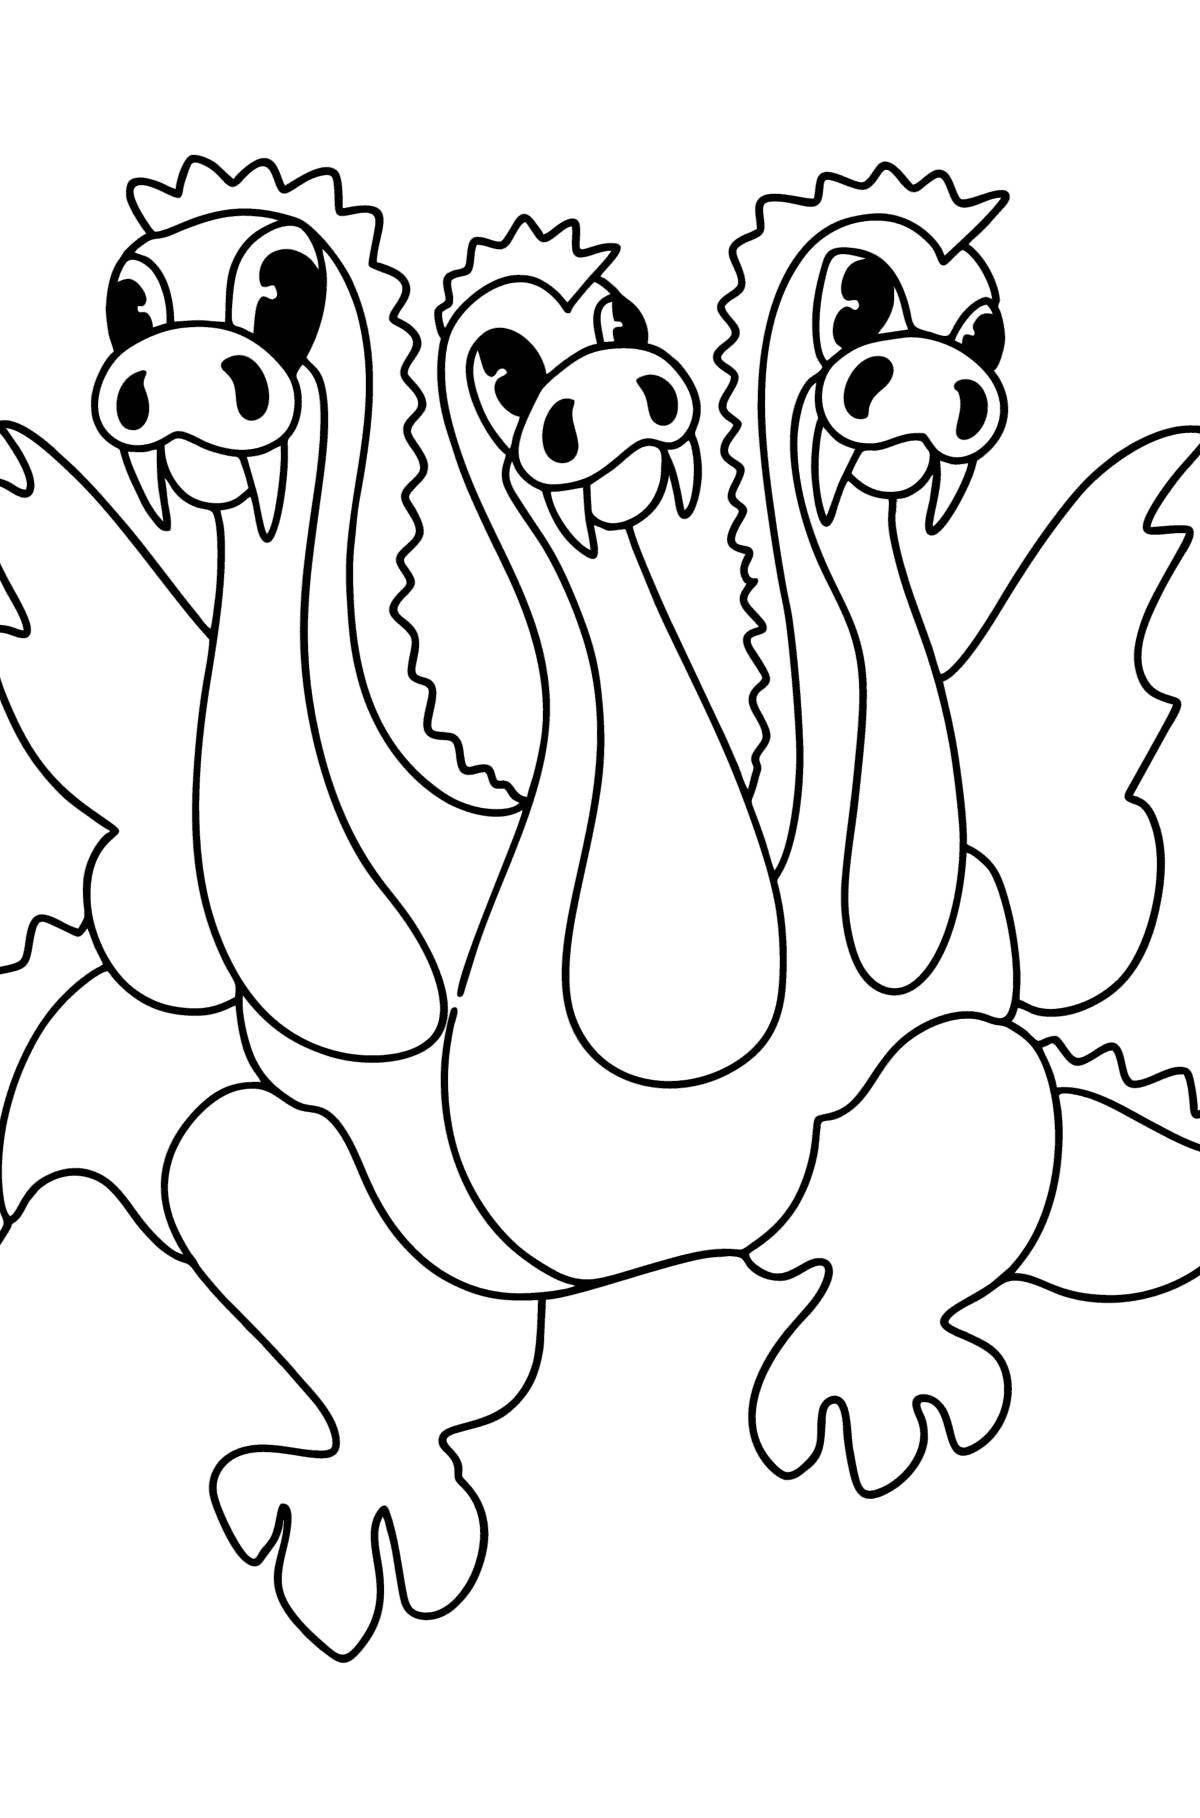 Coloring page formidable three-headed dragon